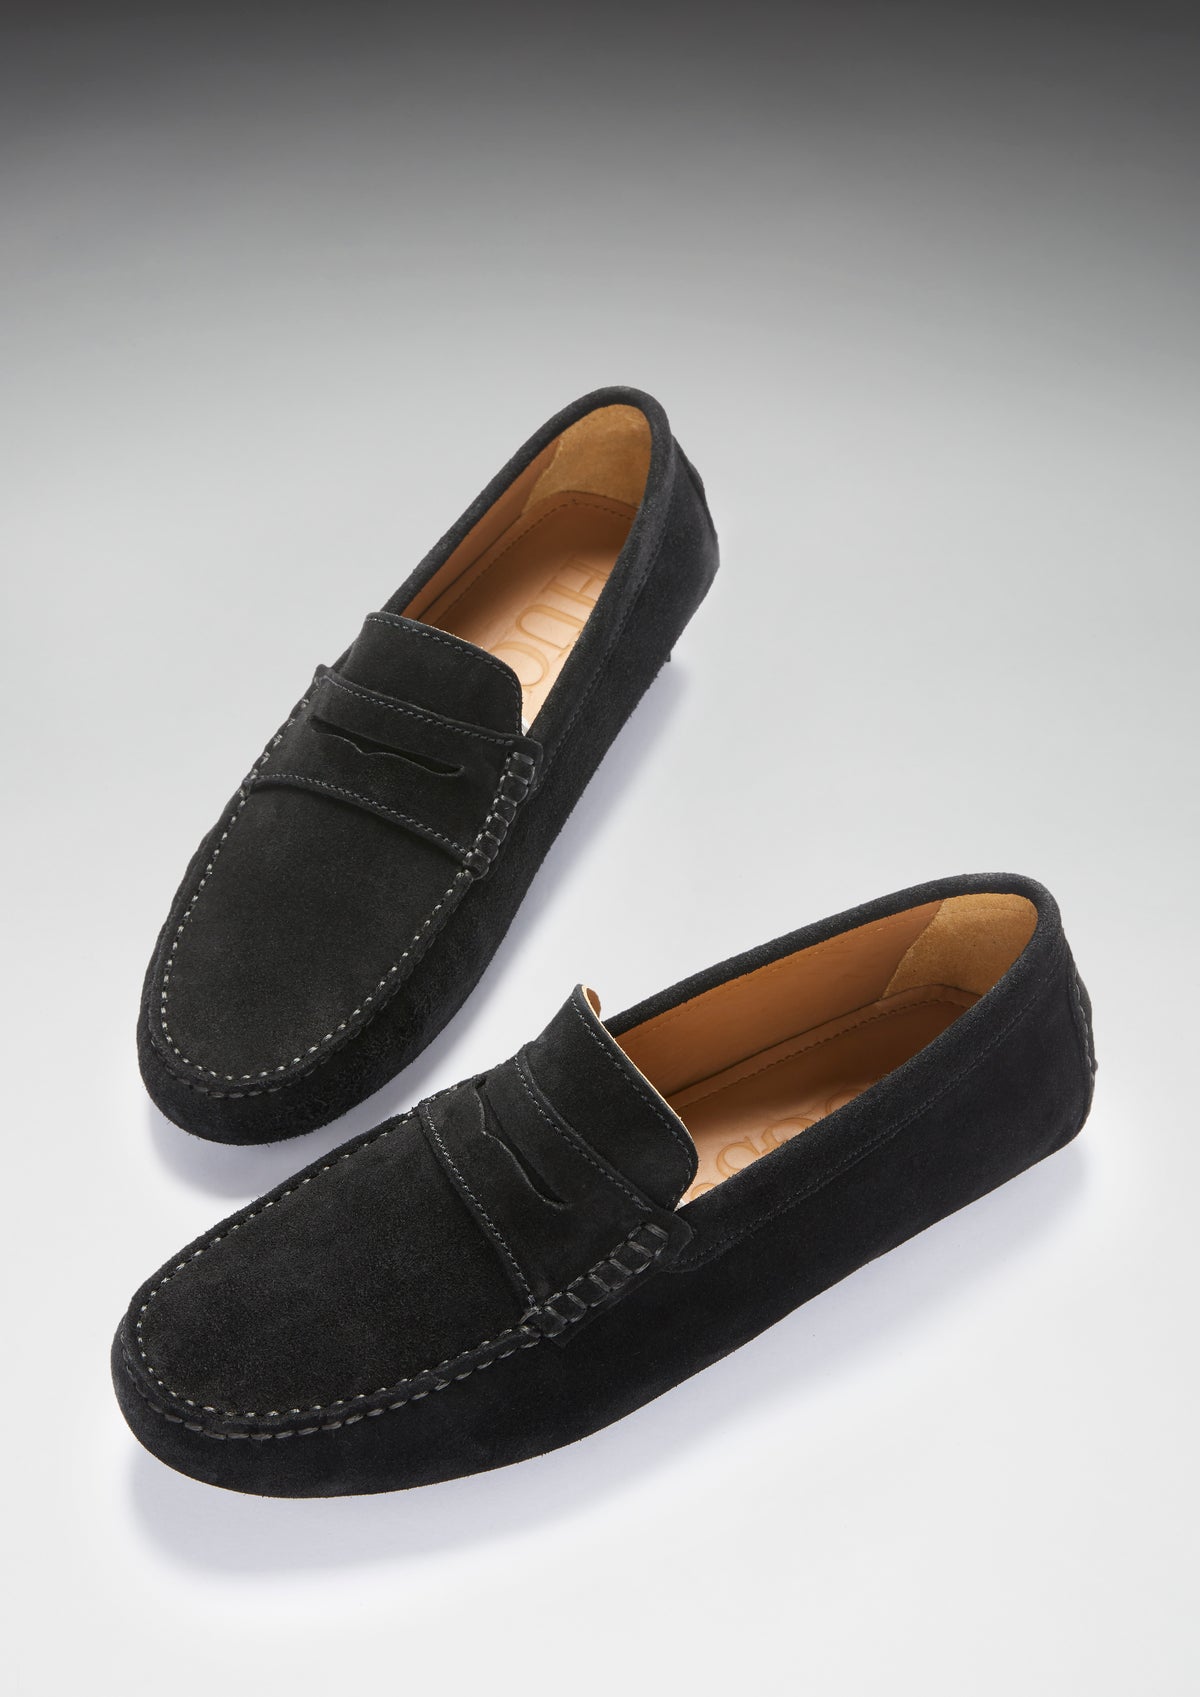 Penny Driving Loafers, black suede - Hugs & Co.